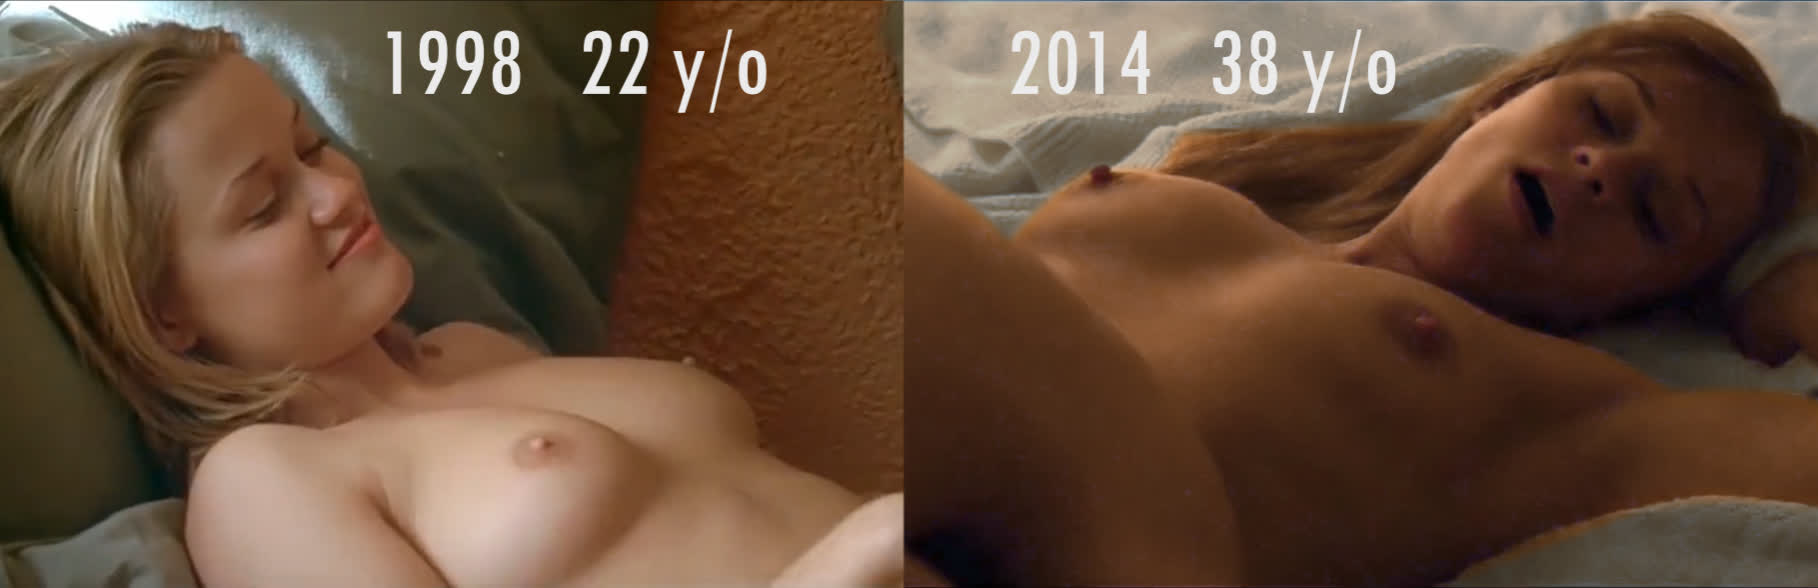 Nude celebs: Reese Witherspoon - Twilight vs Wild - Nude Comparison - GIF V...